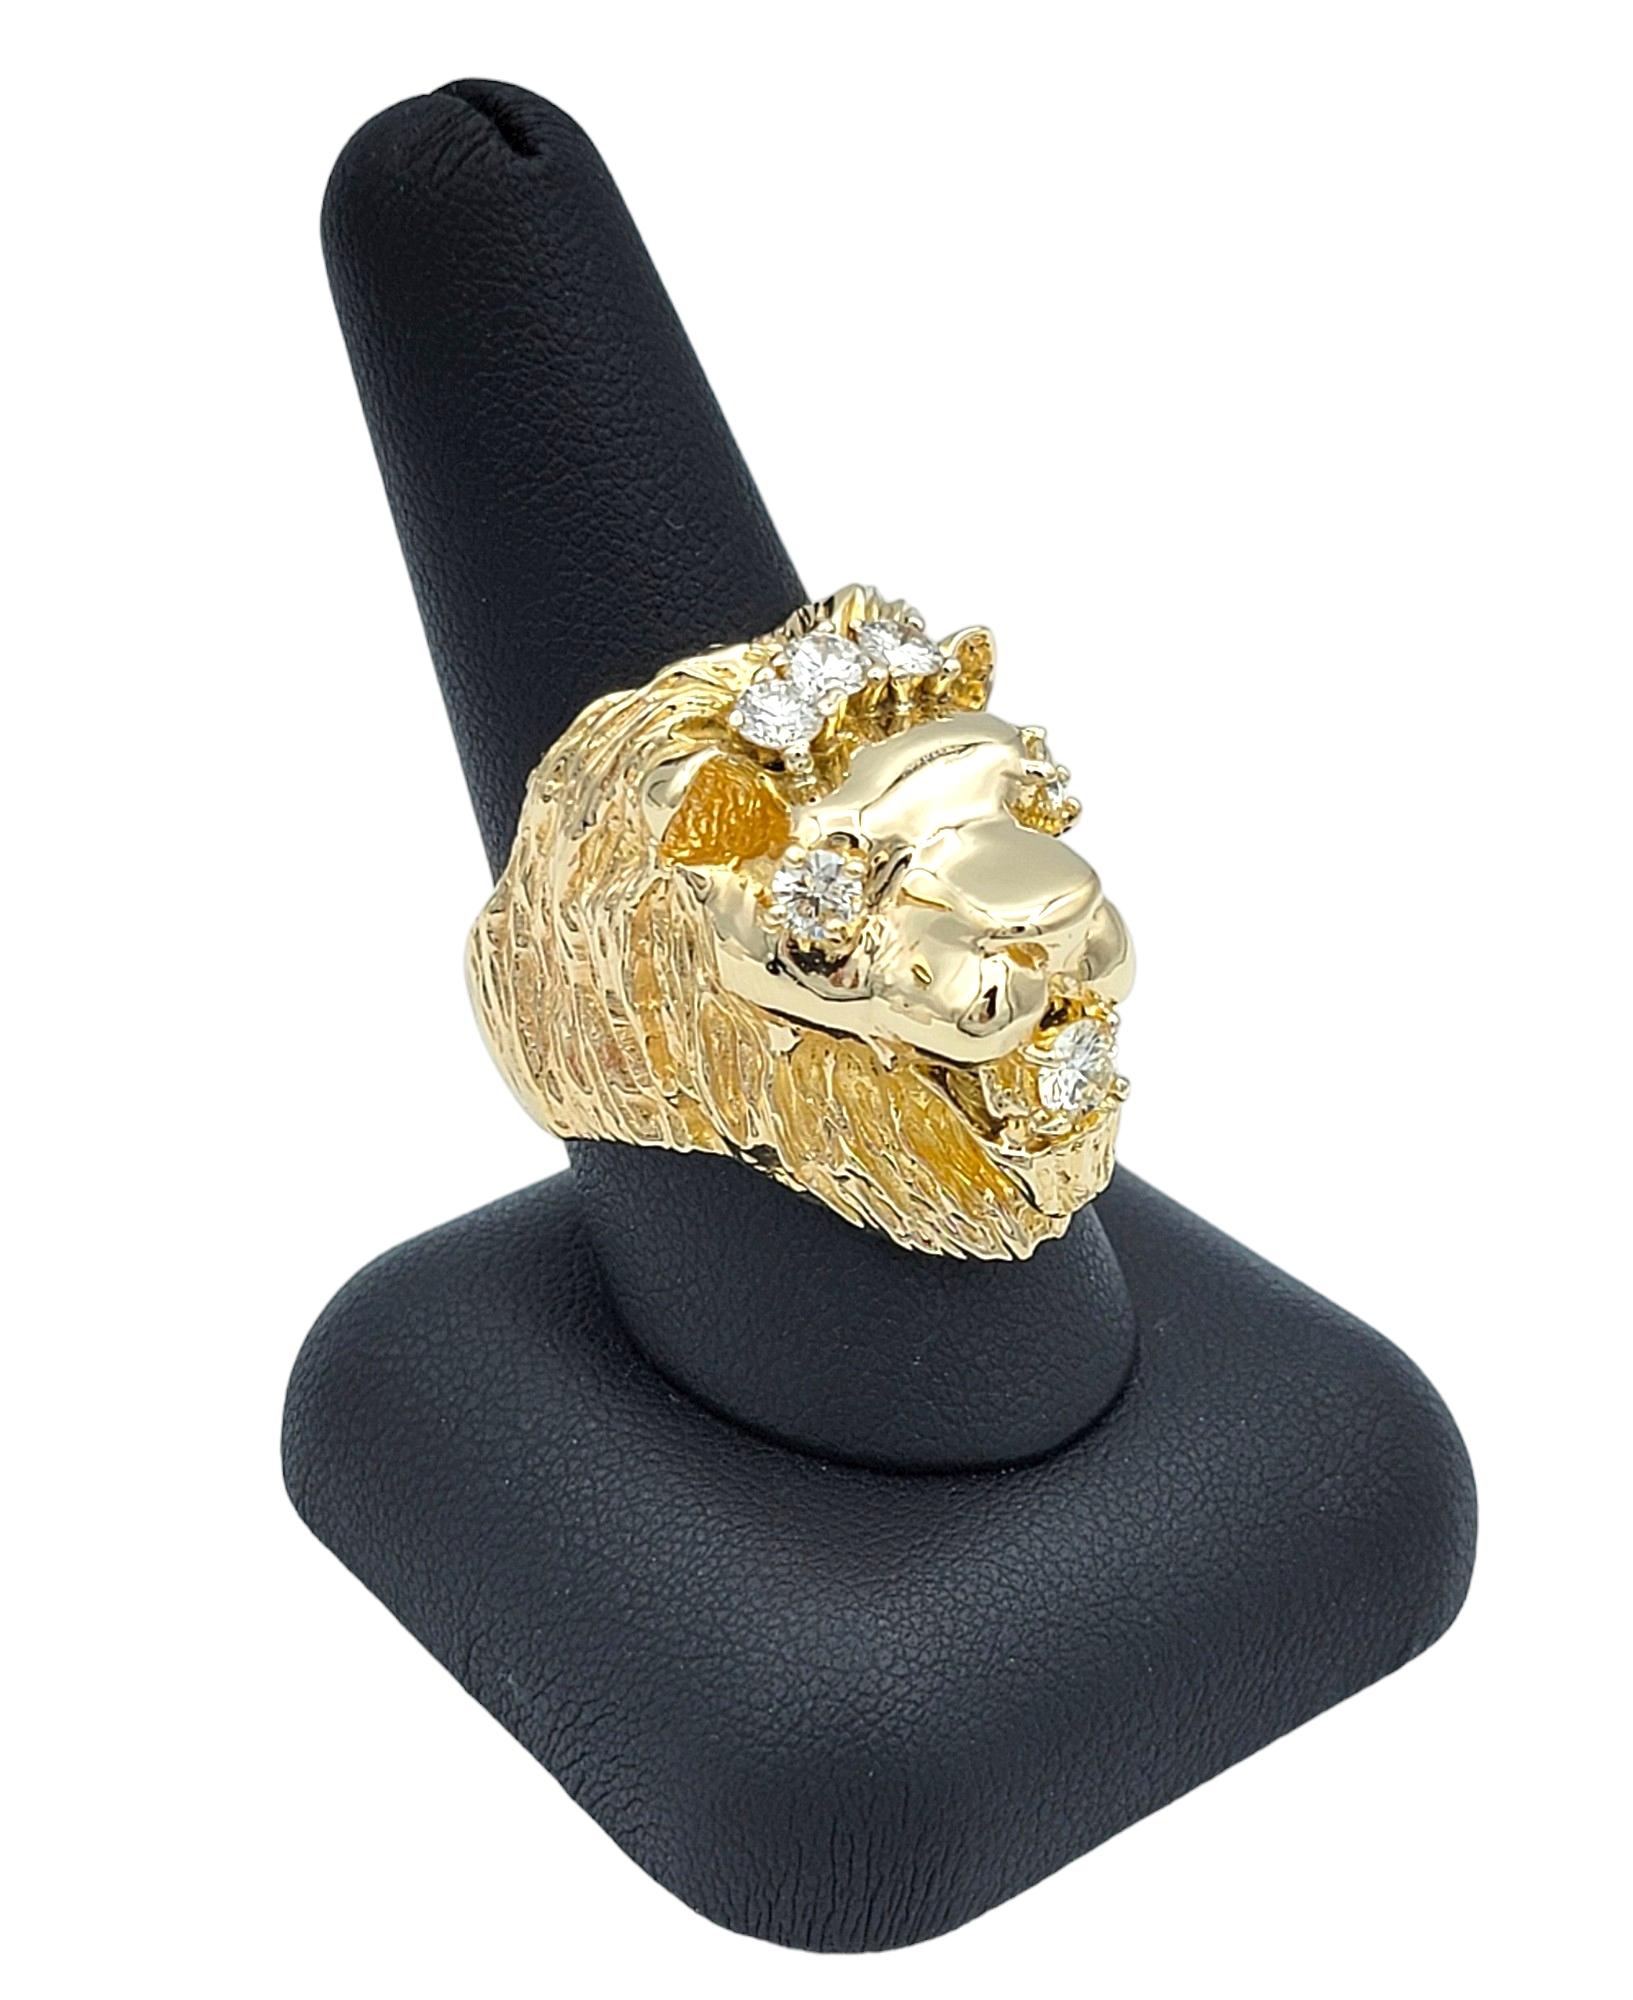 Carved 3D Lion Head with Diamond Accents Bold Ring Set in 14 Karat Yellow Gold For Sale 4